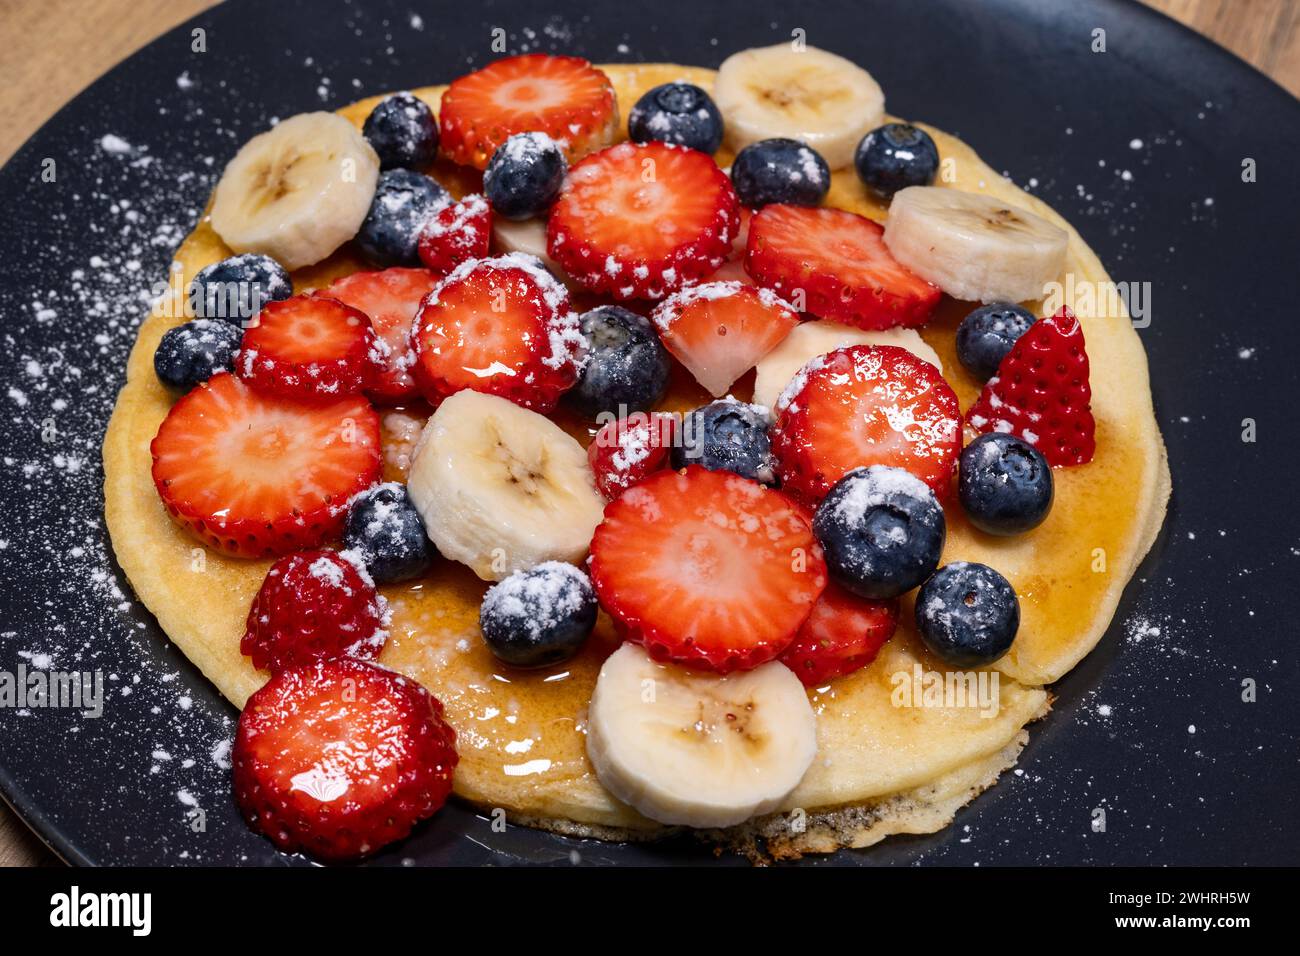 close up breakfast with pancakes with fruit,breakfast strawberries bananas and blueberries with maple syrup and powdered sugars, gluten free Stock Photo